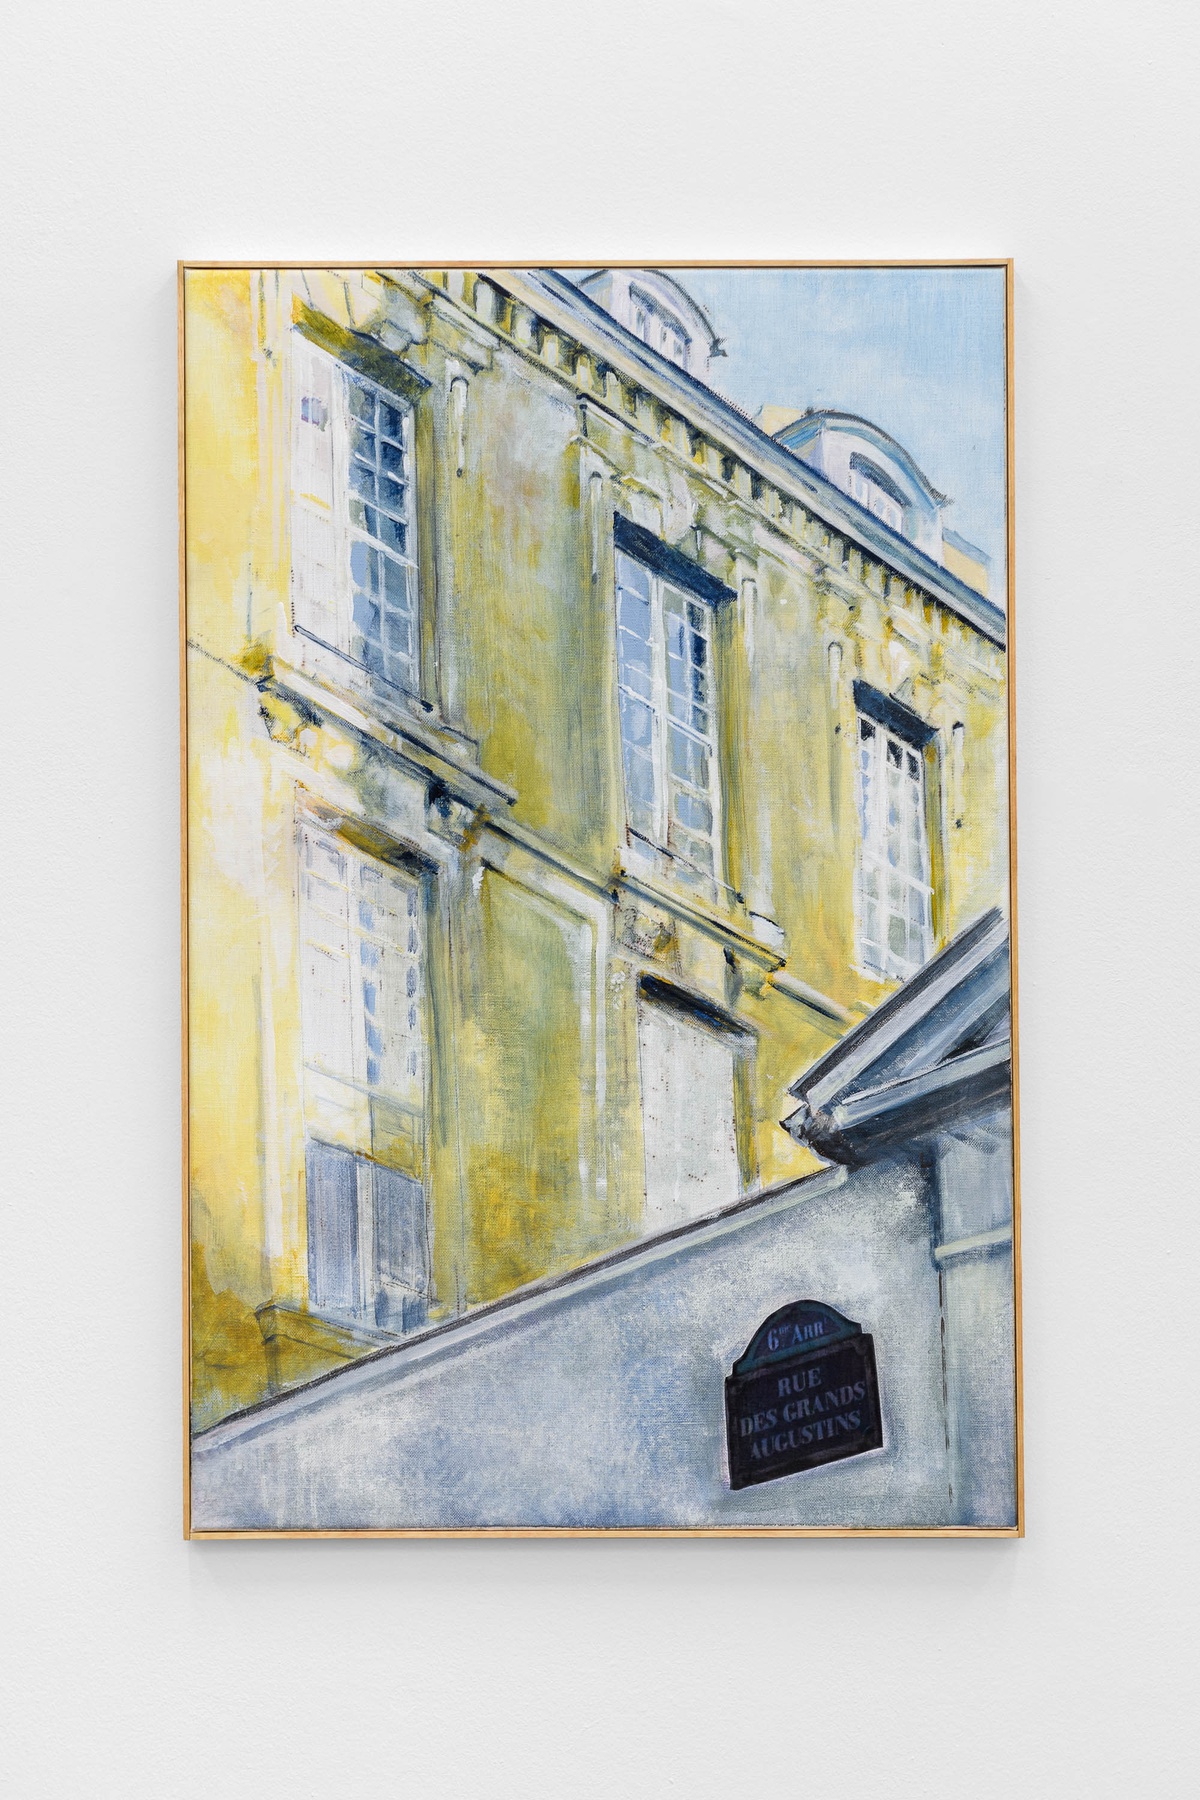 Ariane Mueller, 7 rue de Grand Augustins 5, 2023acrylic and paper on canvas, artist made frame100 x 65 cm